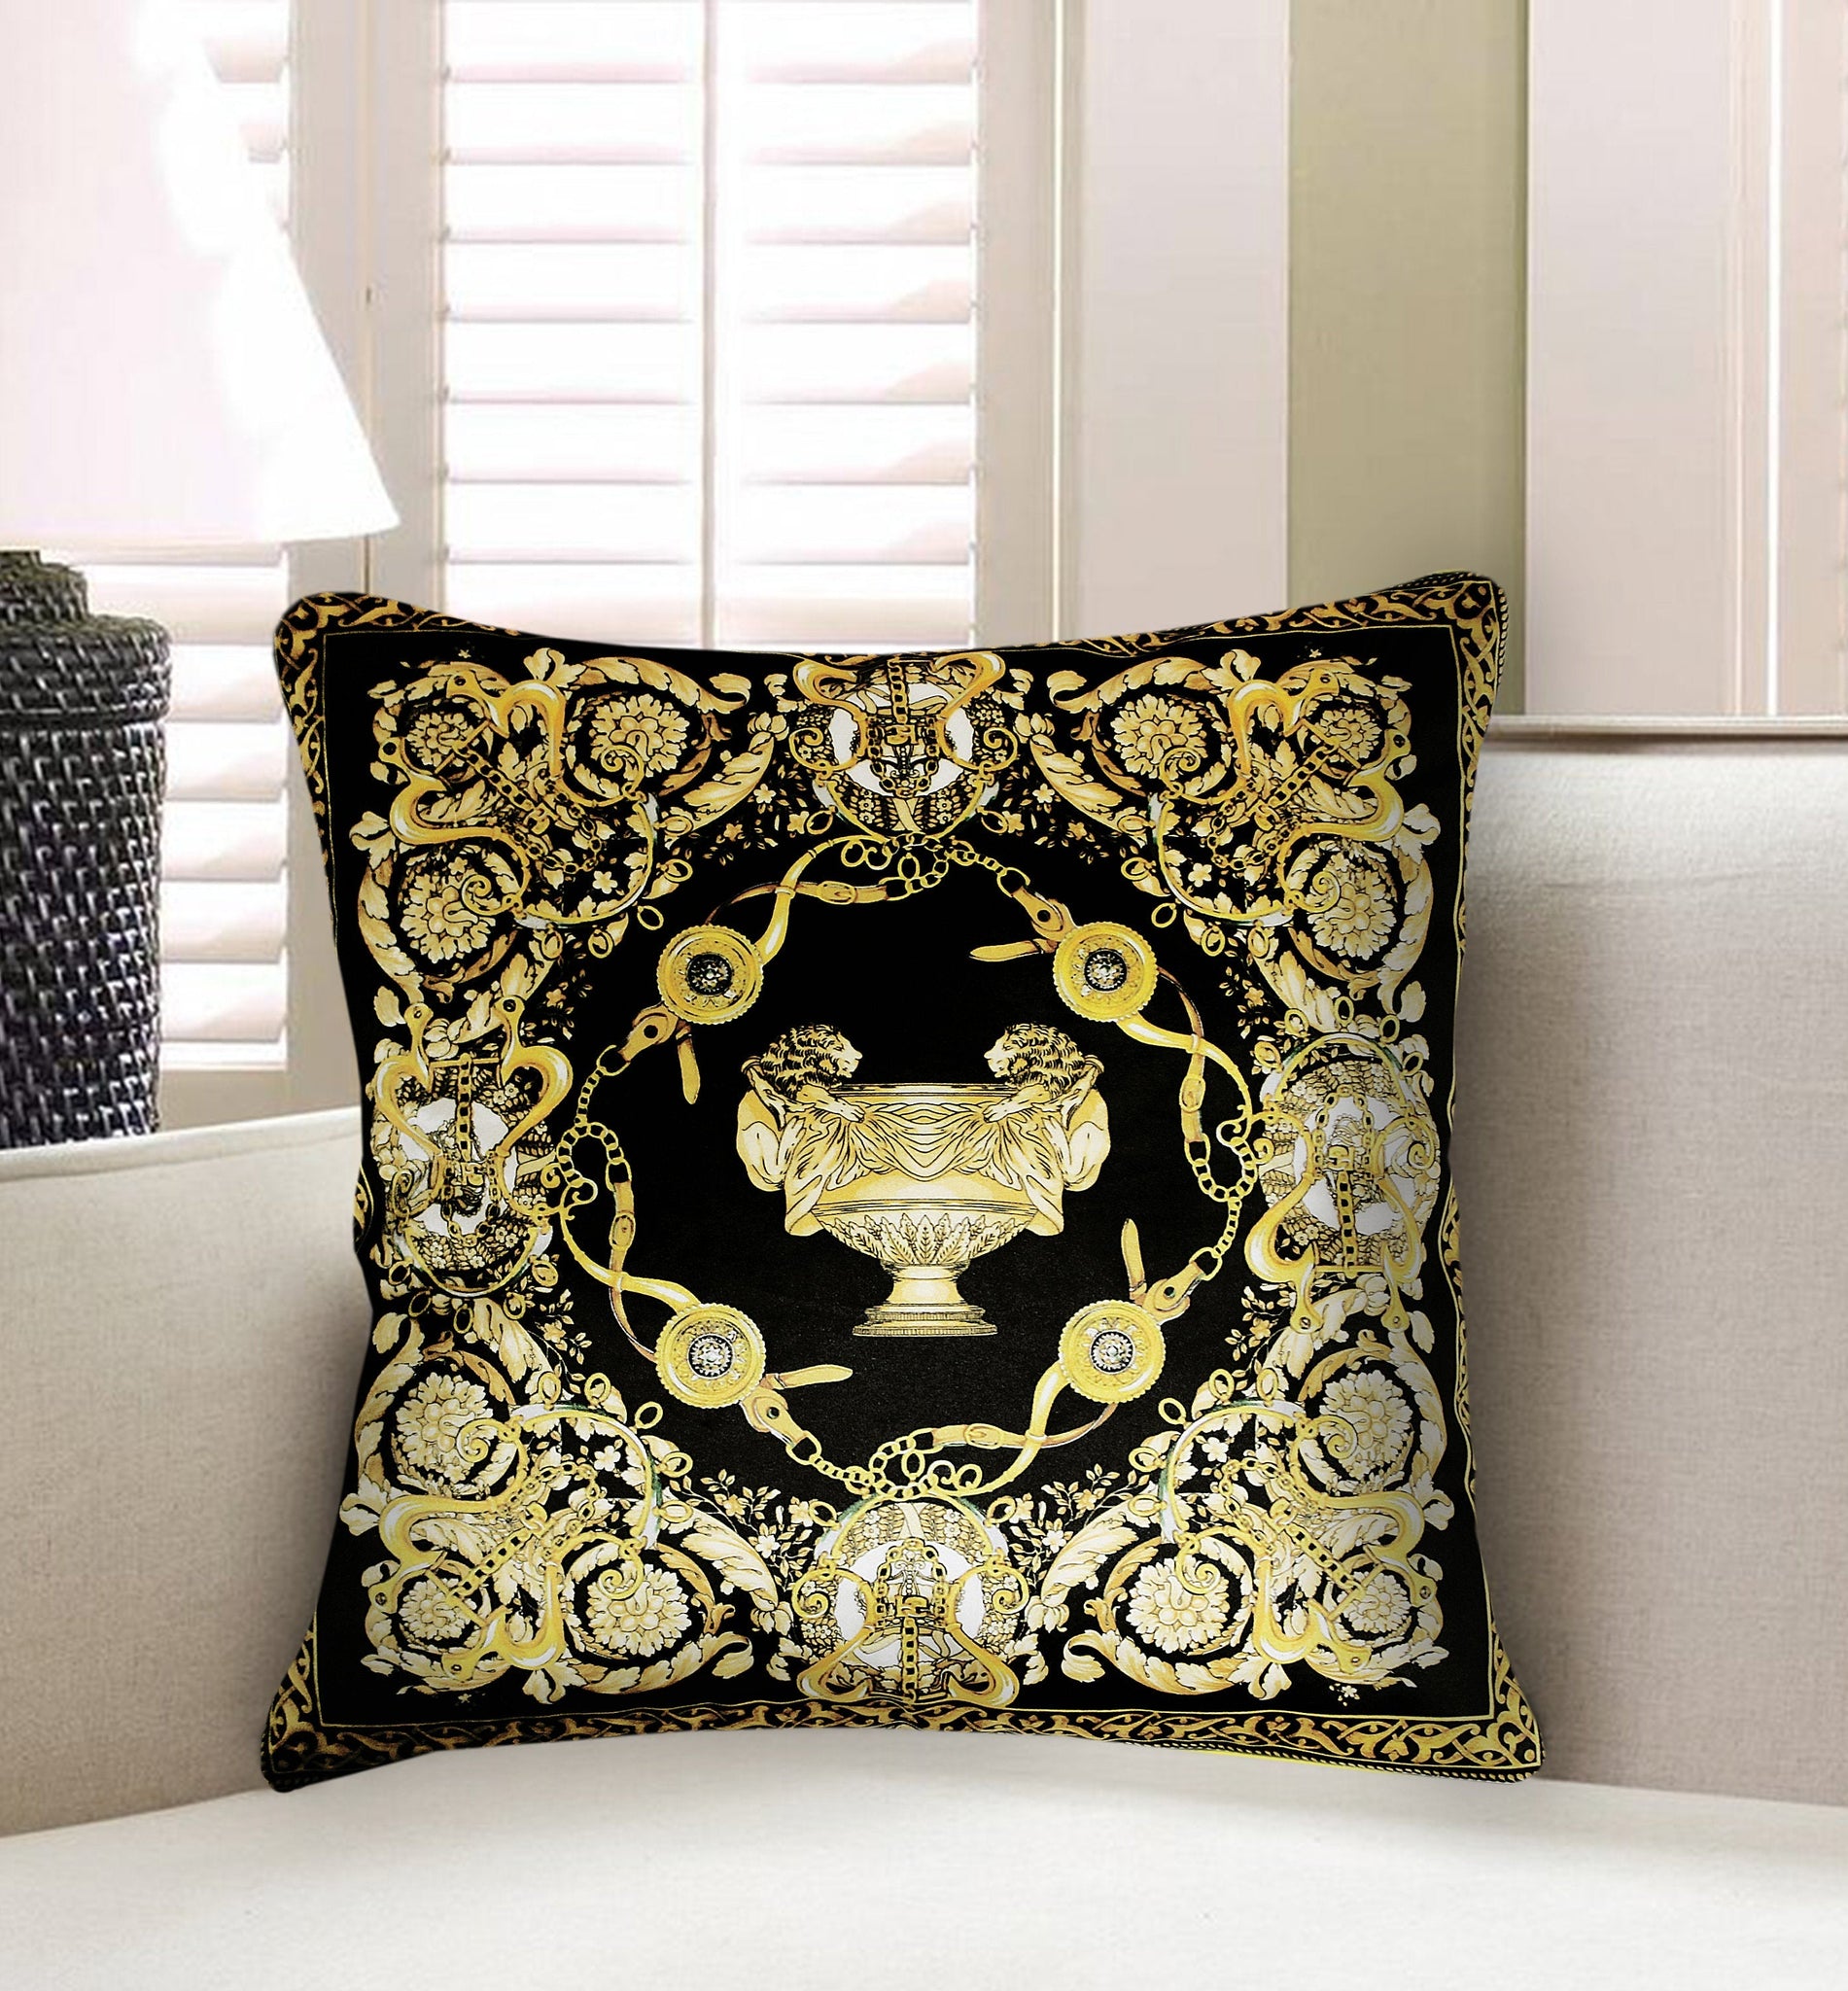 Velvet Cushion Cover Classic Baroque Style Decorative Traditional Floral  Motif and Antique Greek Cup Throw Pillow for Sofa Chair 45x45cm 18x18 Inches